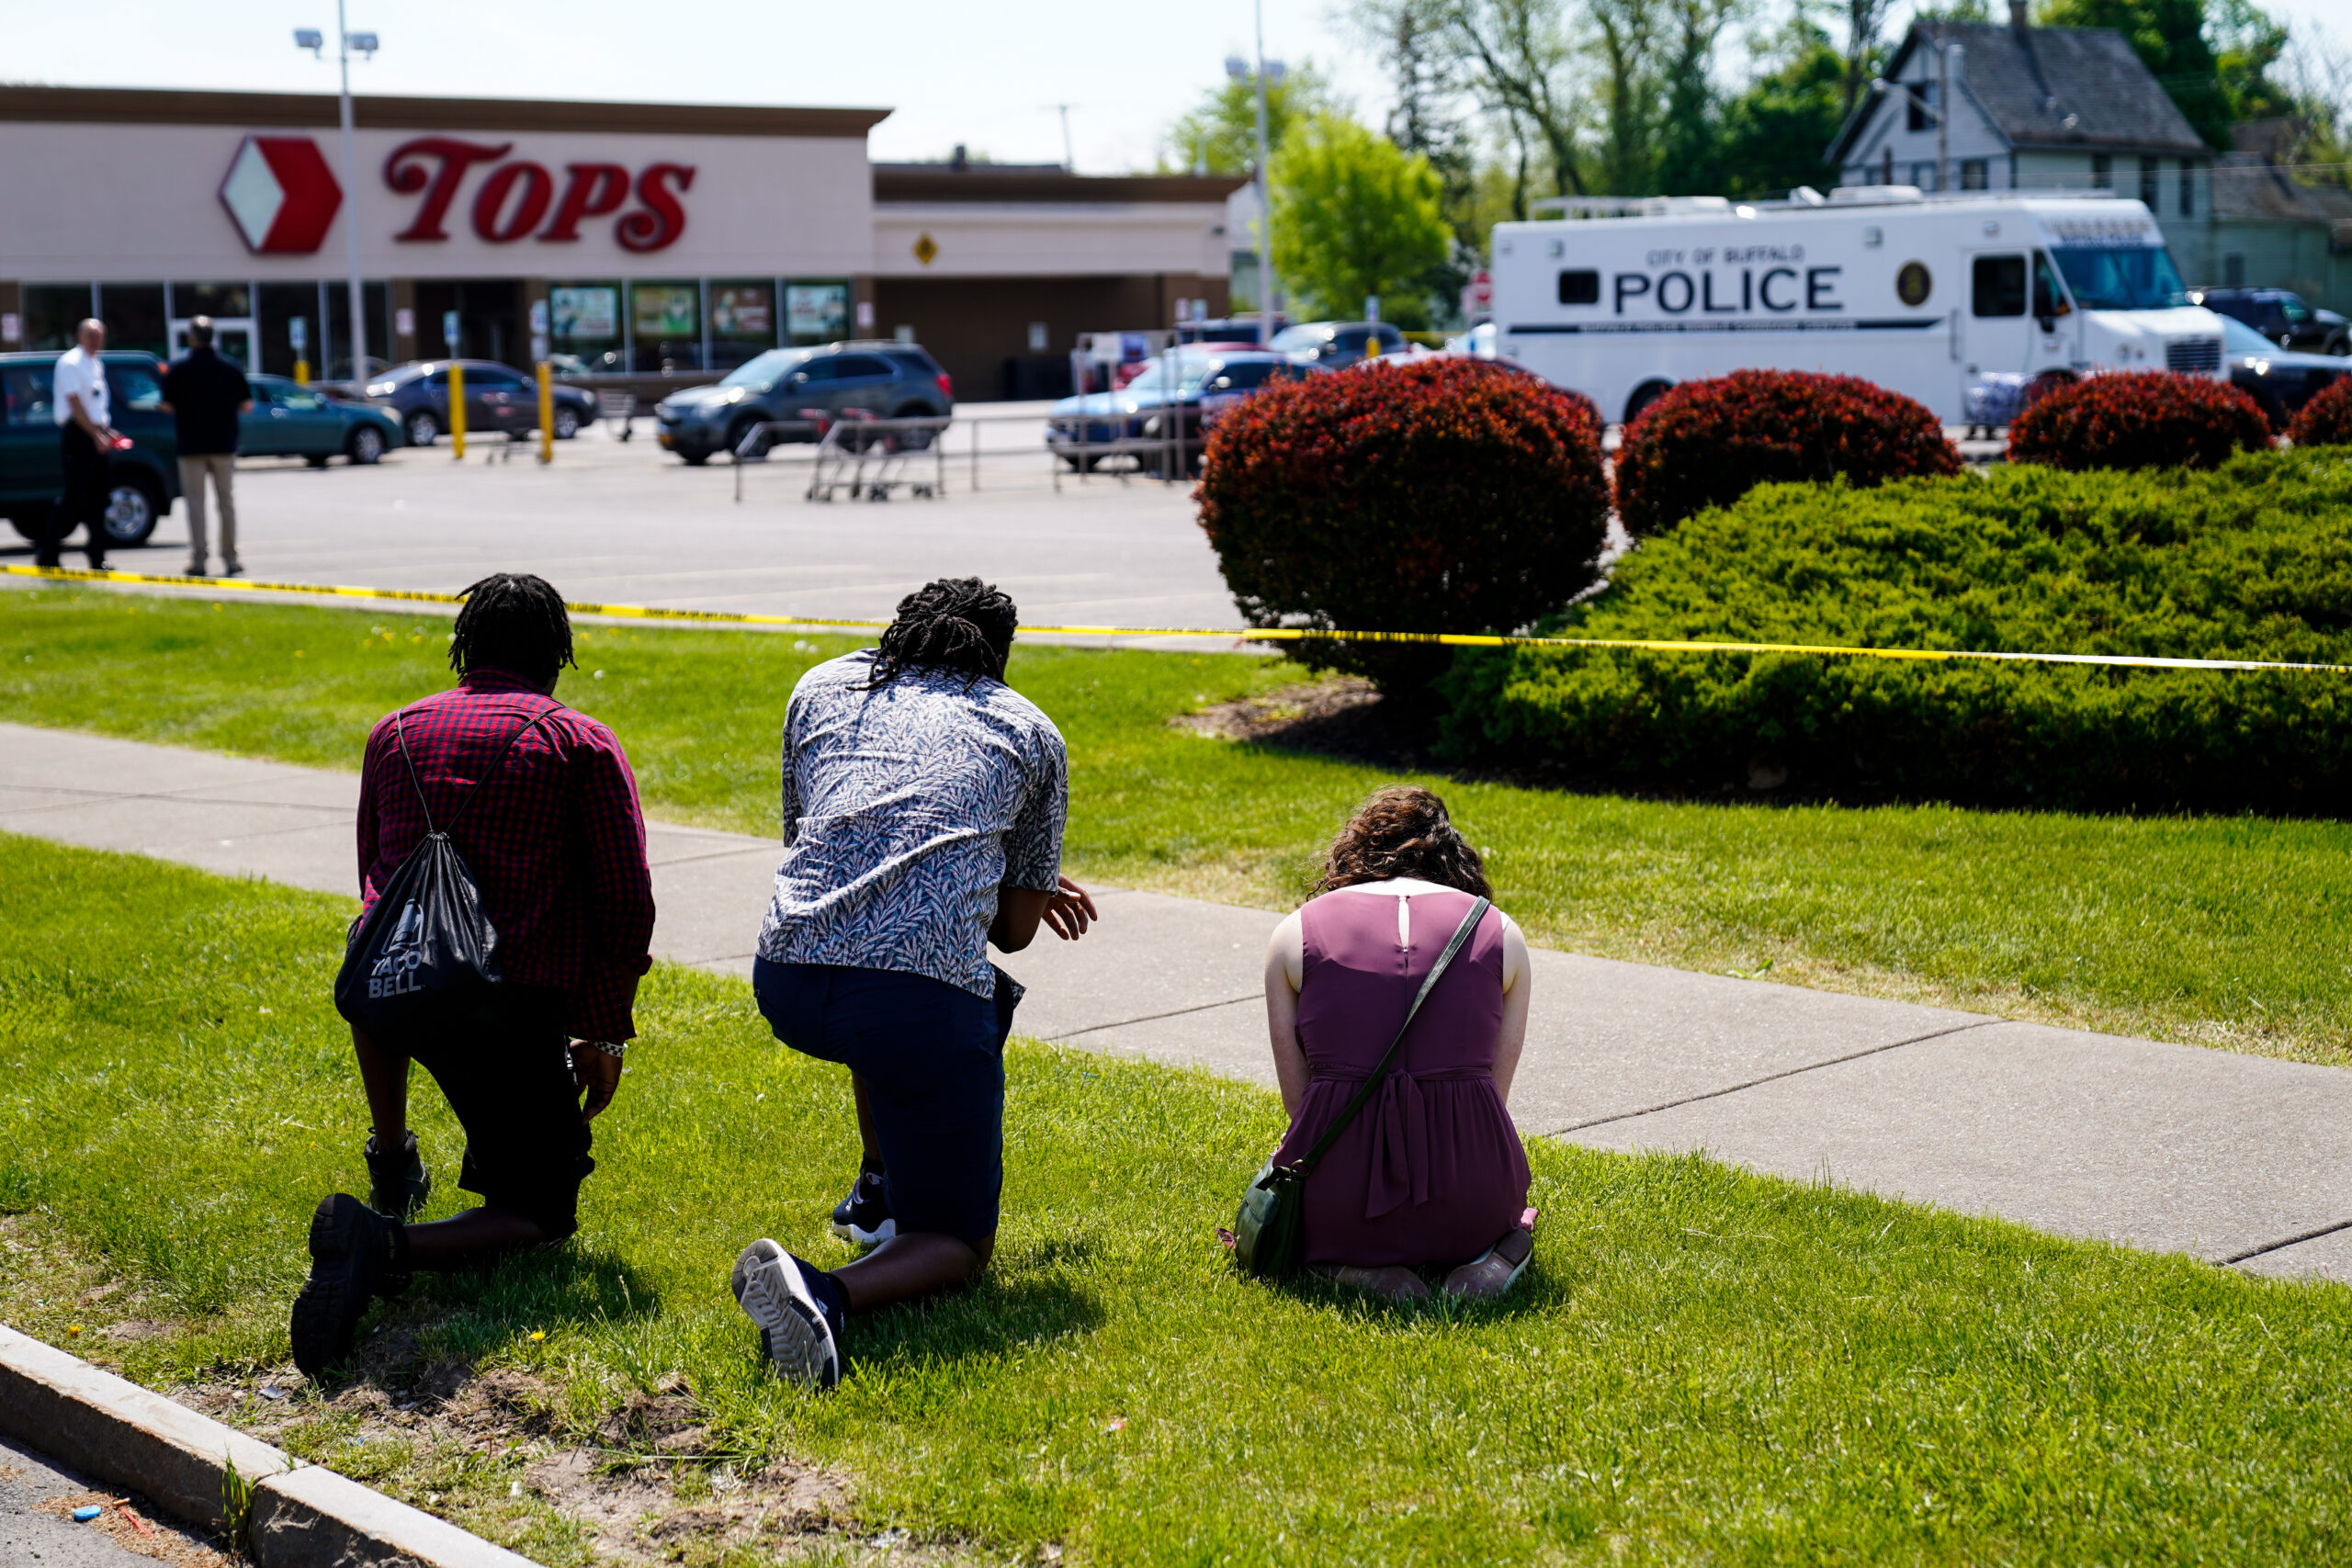 People pray outside the scene of Saturday's shooting at a supermarket, in Buffalo, N.Y., Sunday, May 15, 2022. The shooting is the latest example of something that's been part of U.S. history since the beginning: targeted racial violence. (AP Photo/Matt Rourke)